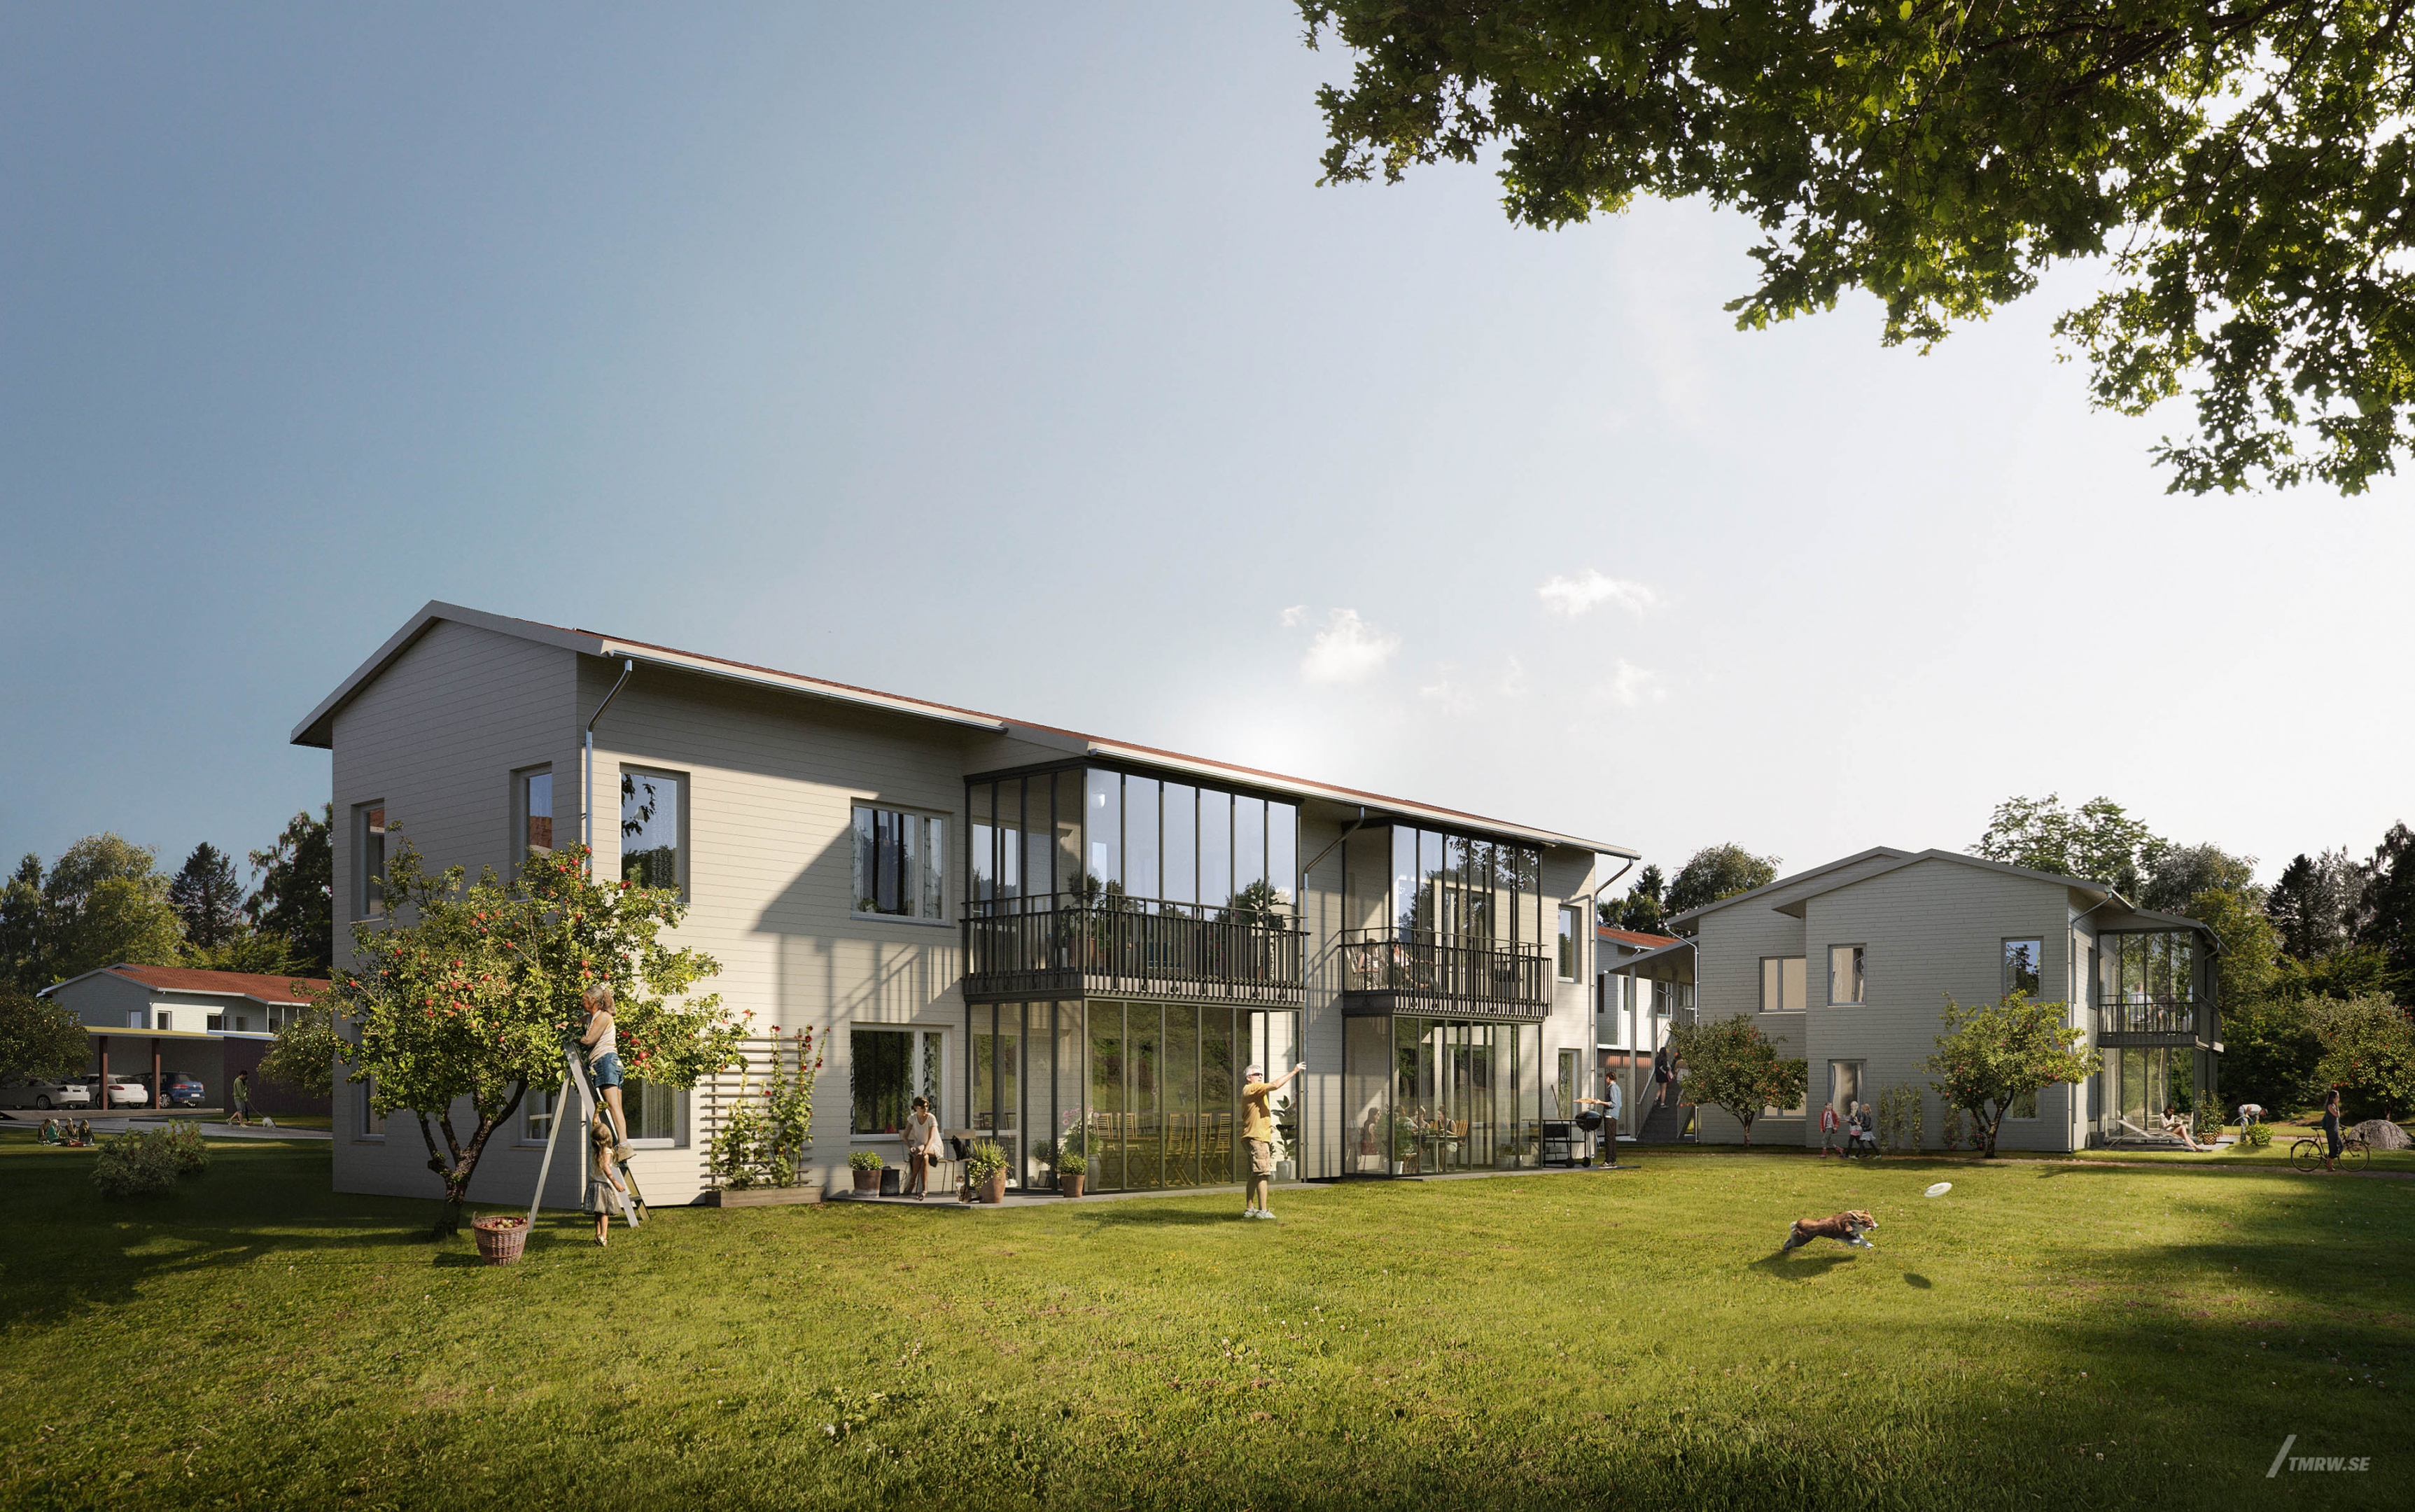 Architectural visualization of Korseberg Park for Riksbyggen, residential house with green garden, people are enjoying the summer weather